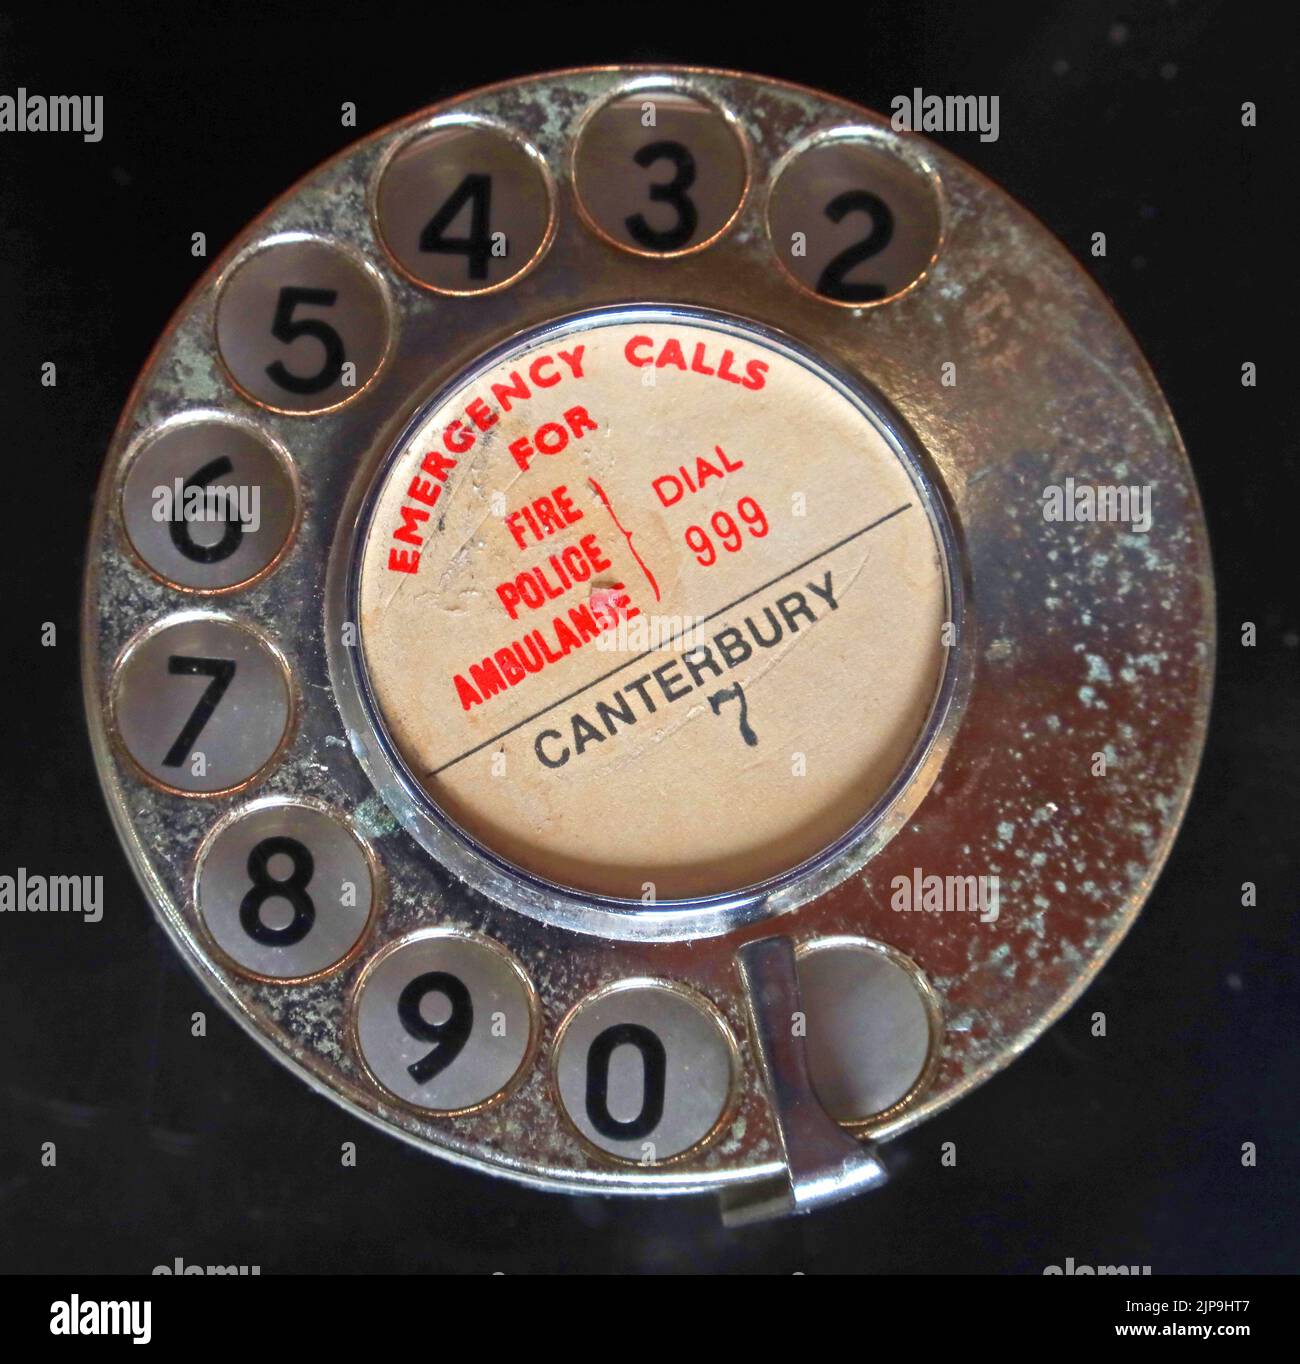 Rotary telephone dial, Emergency Calls, for Fire, Police, Ambulance, Dial 999, Canterbury 7 Stock Photo